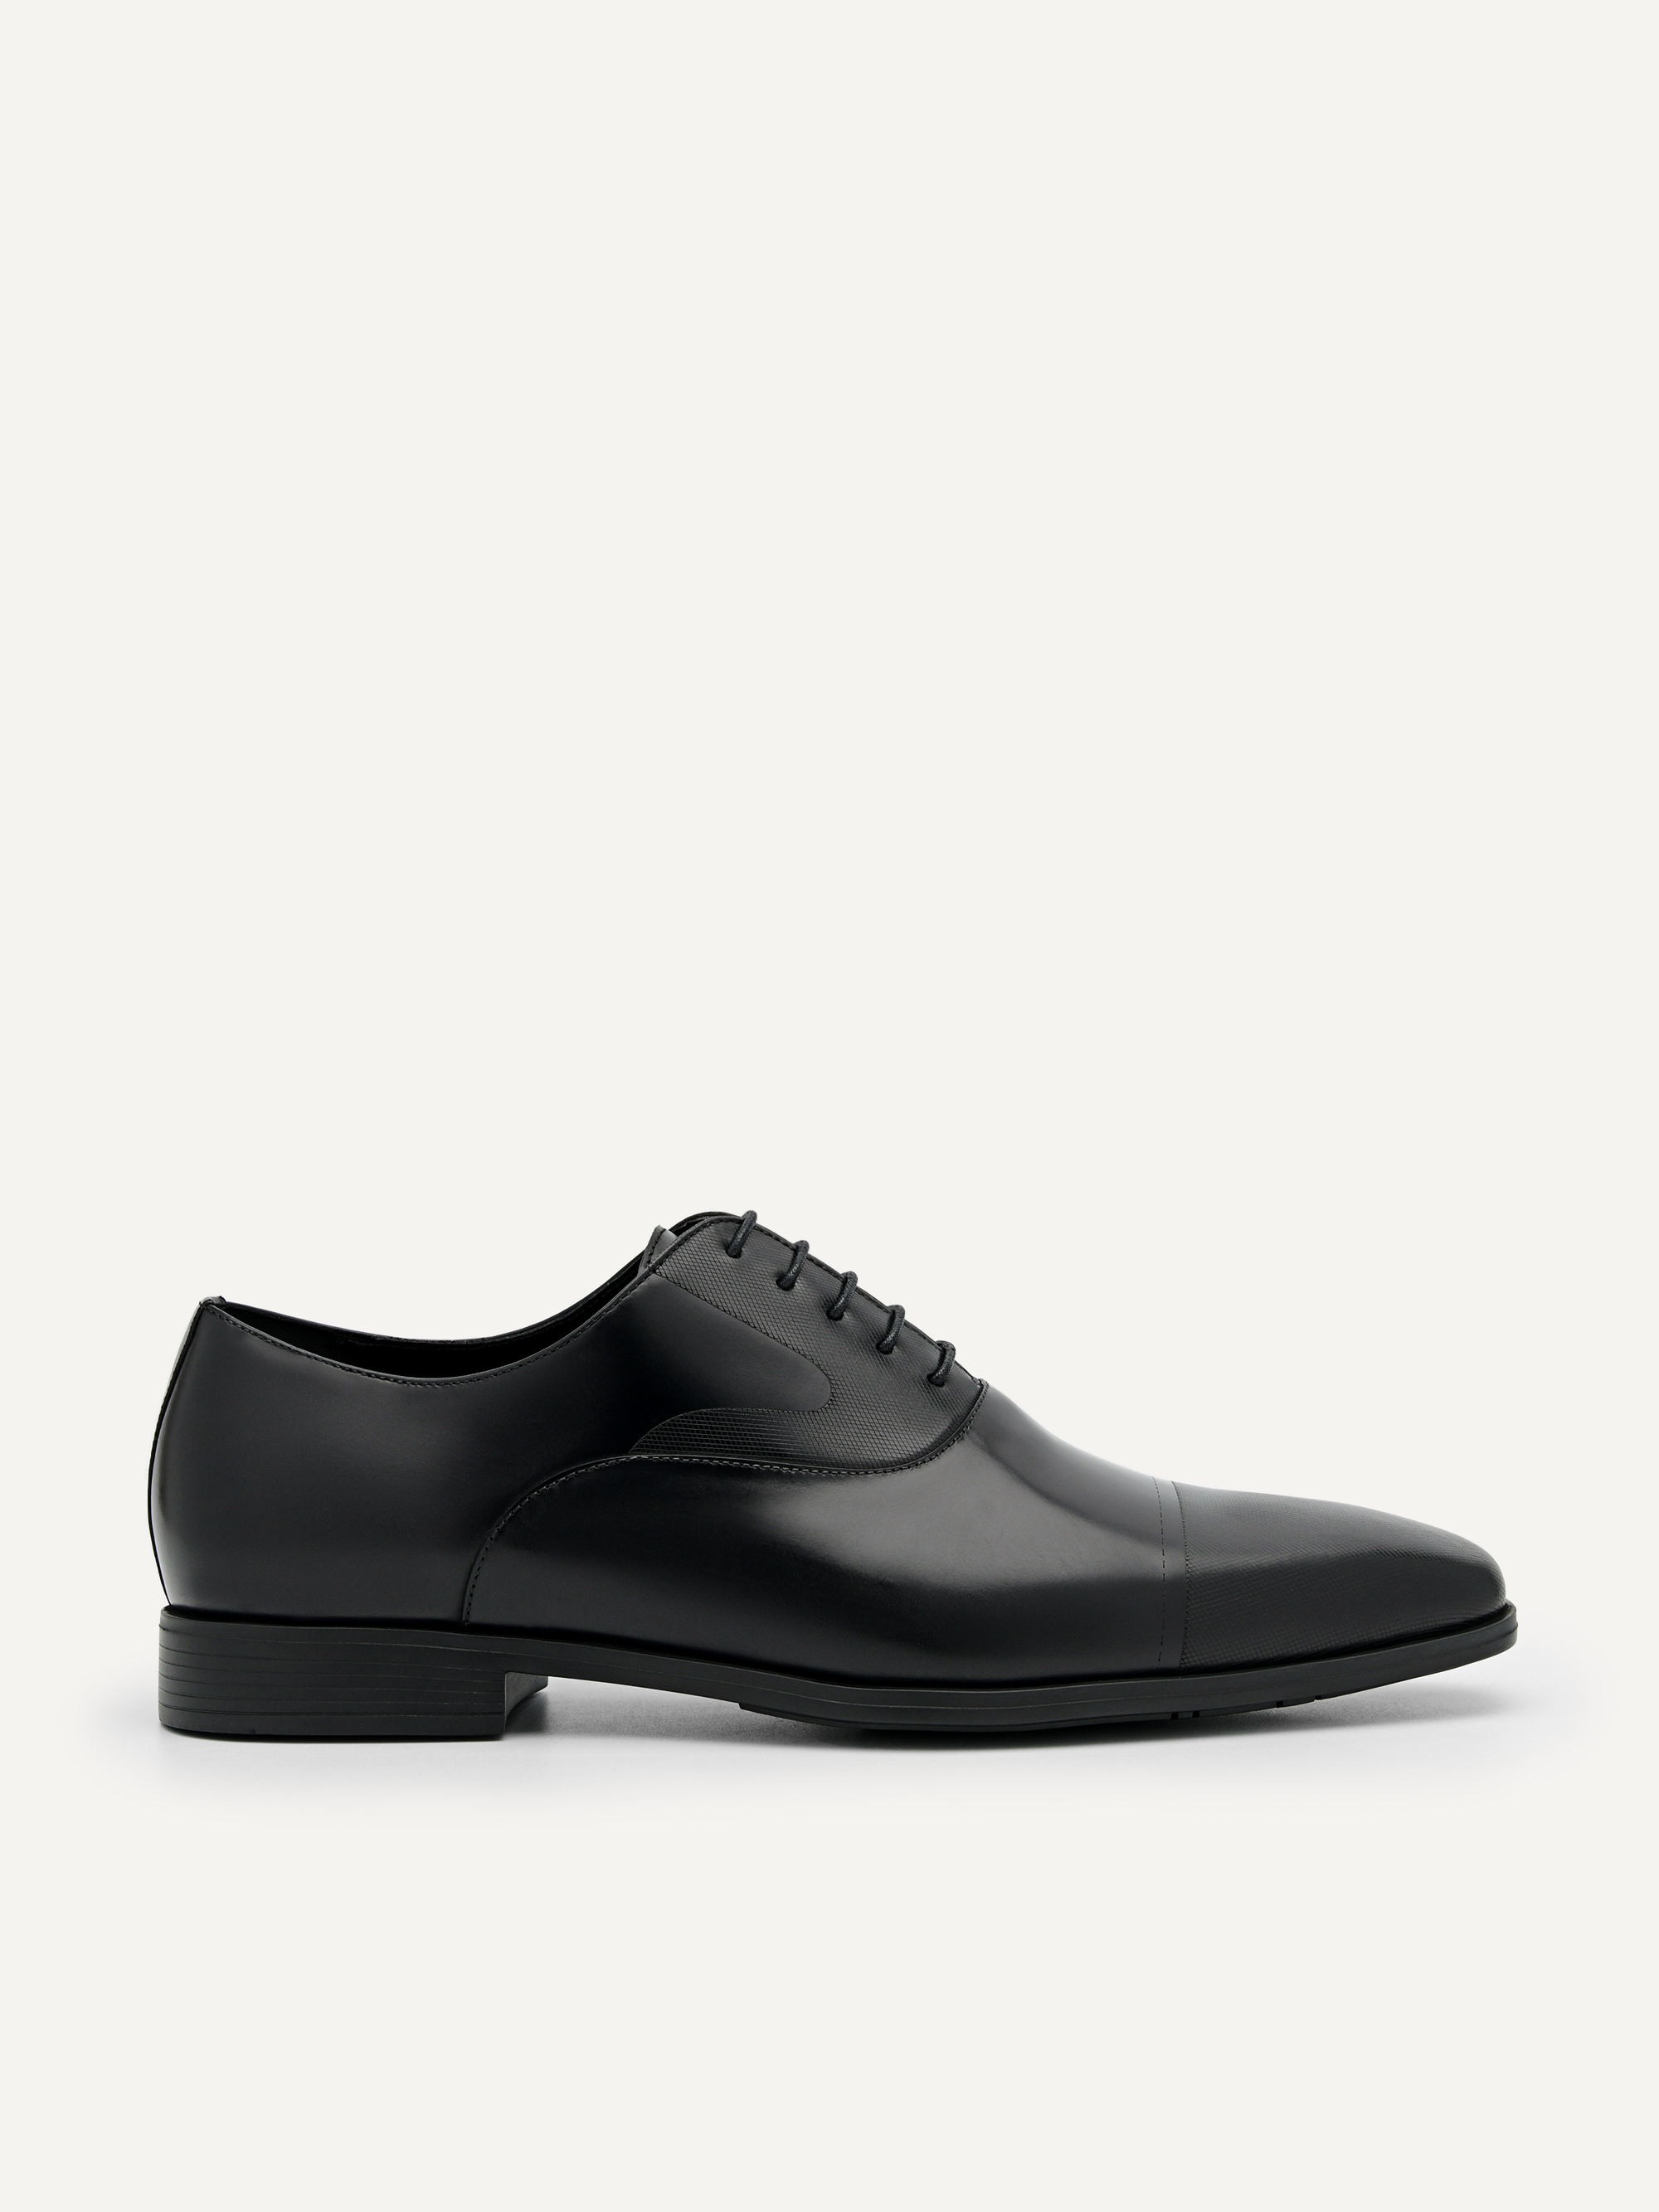 Black Altitude Lightweight Leather Oxford Shoes - PEDRO SG